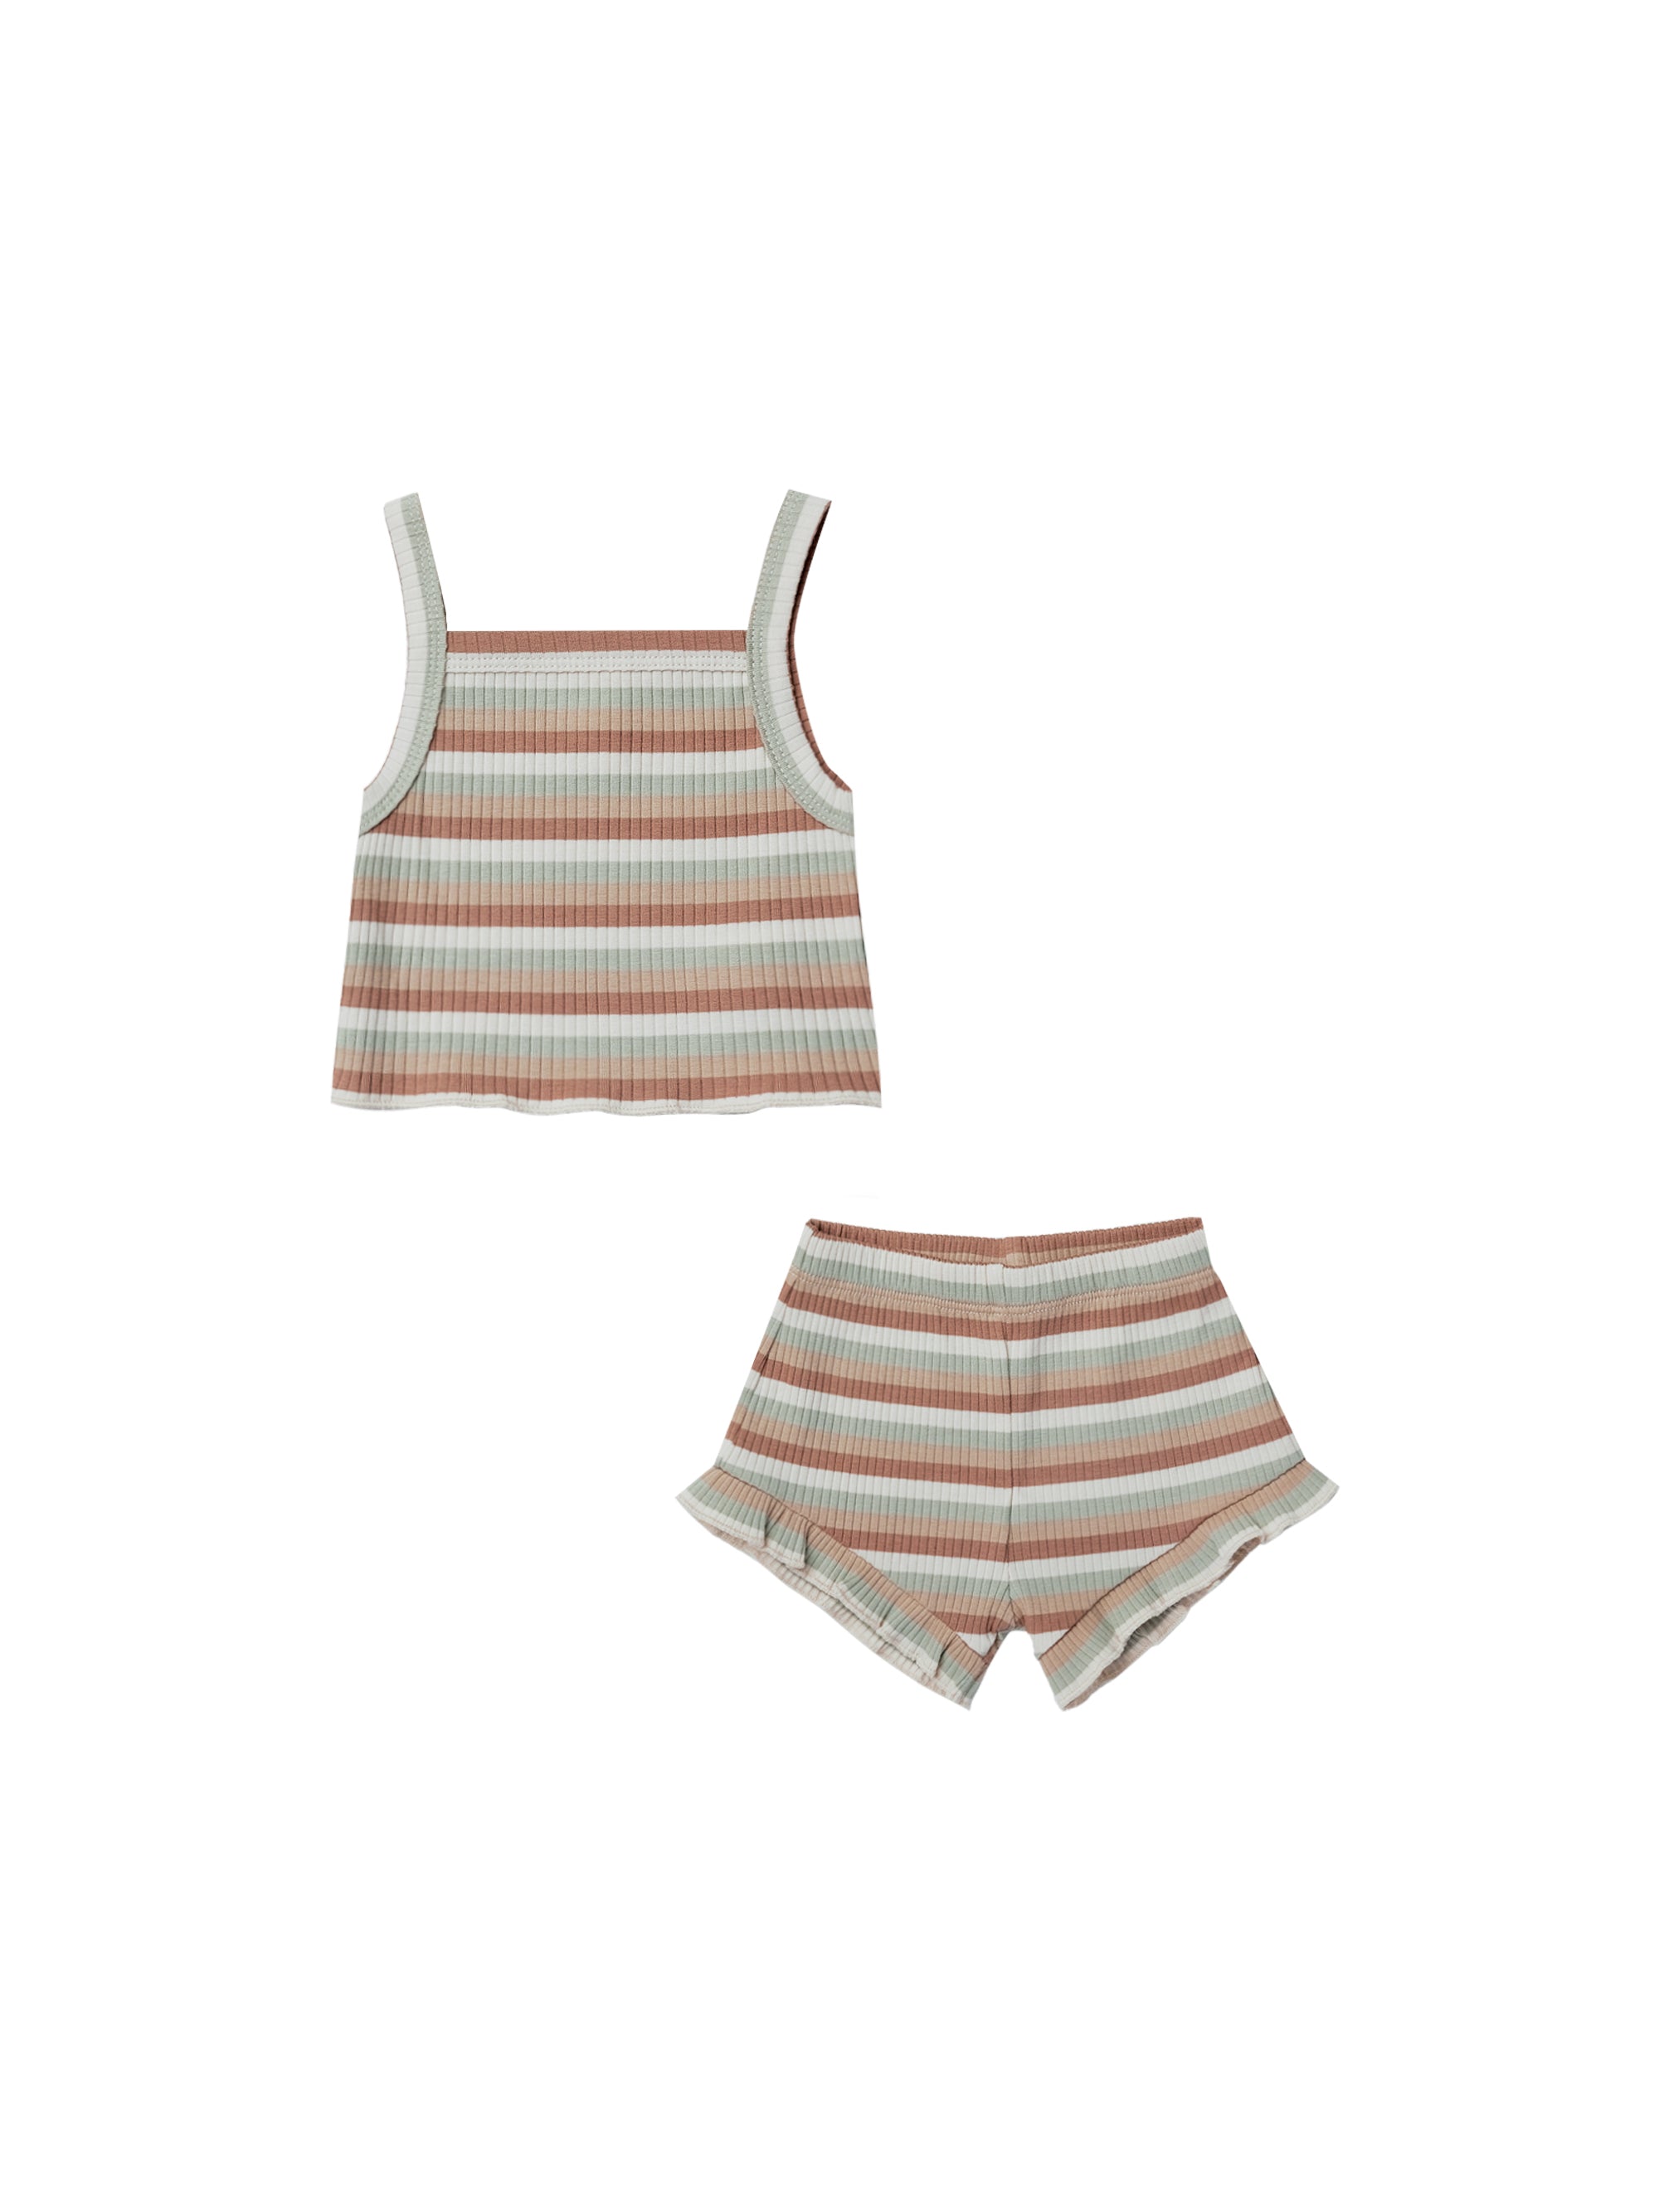 Quincy Mae | Evie Tank and Shortie Set | Summer Stripes